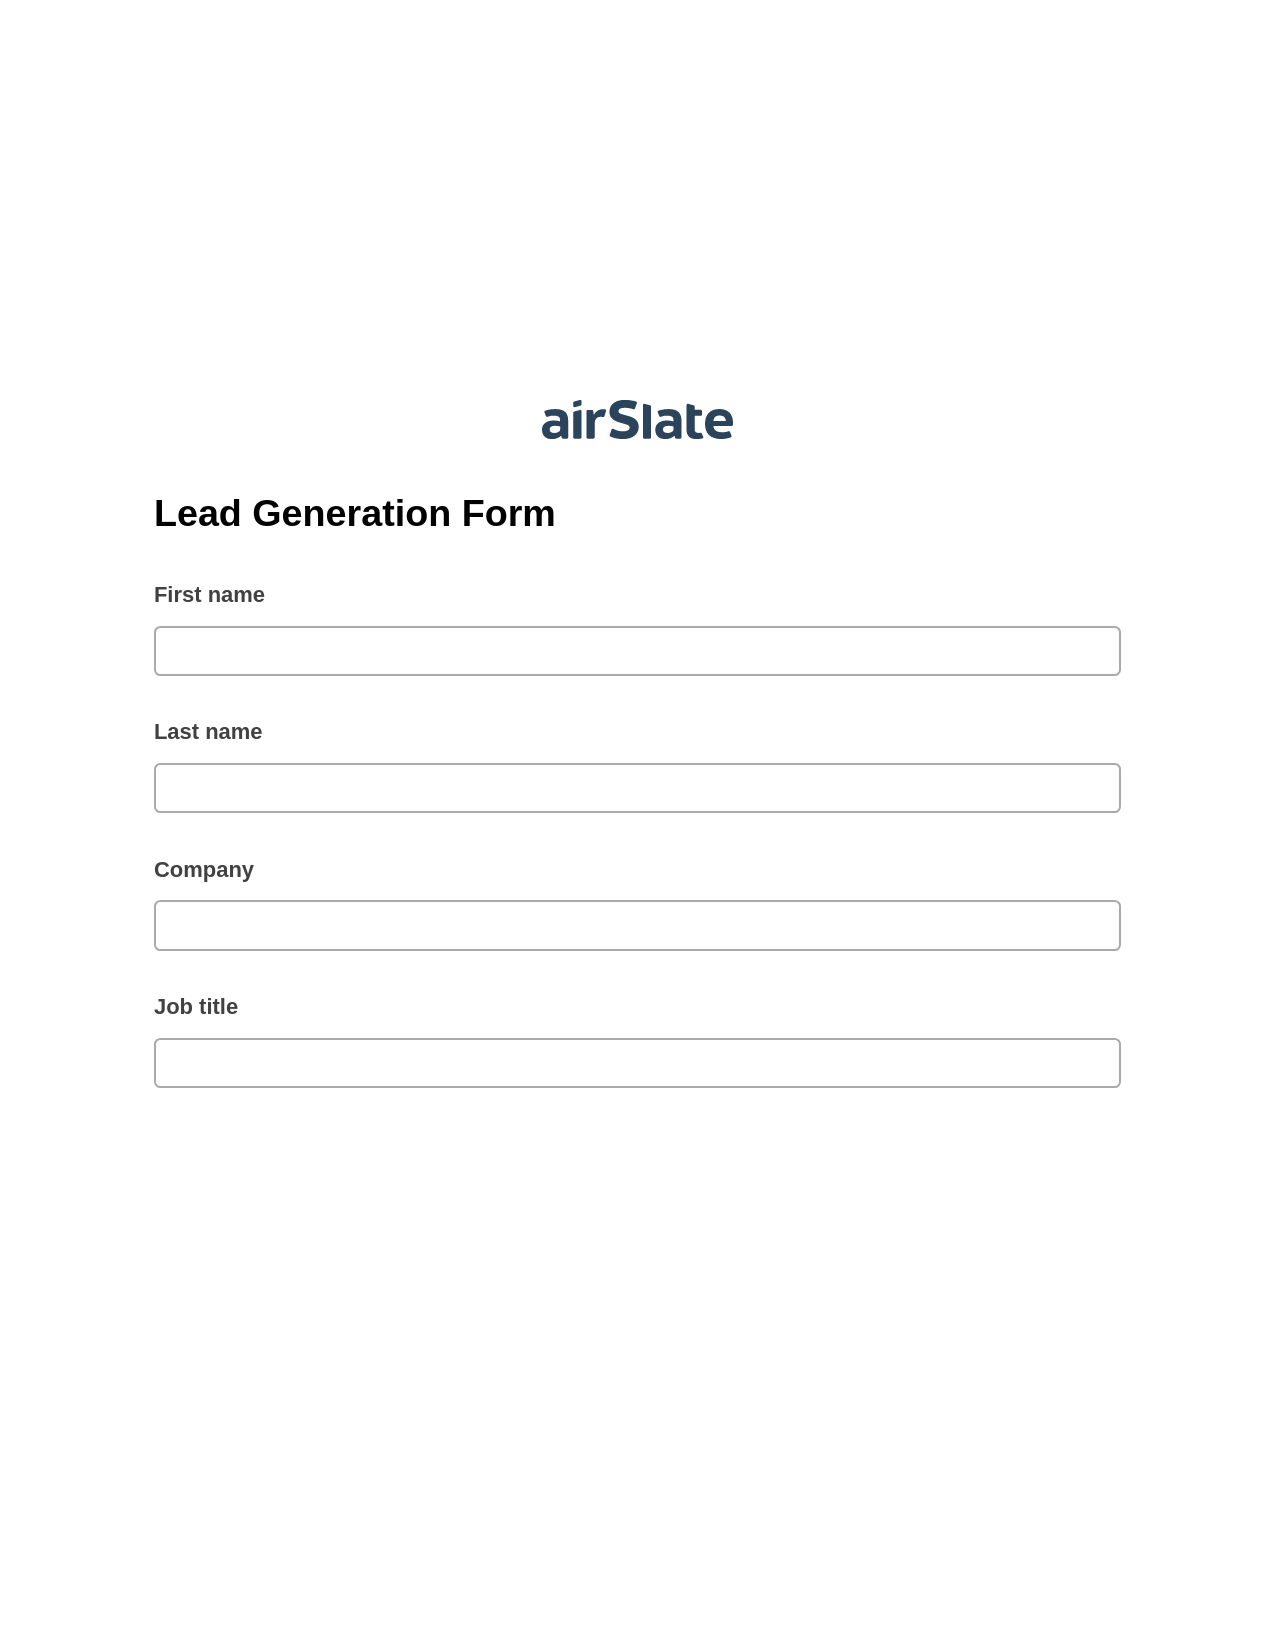 Lead Generation Form Pre-fill from Google Sheets Bot, Add Tags to Slate Bot, Archive to Google Drive Bot